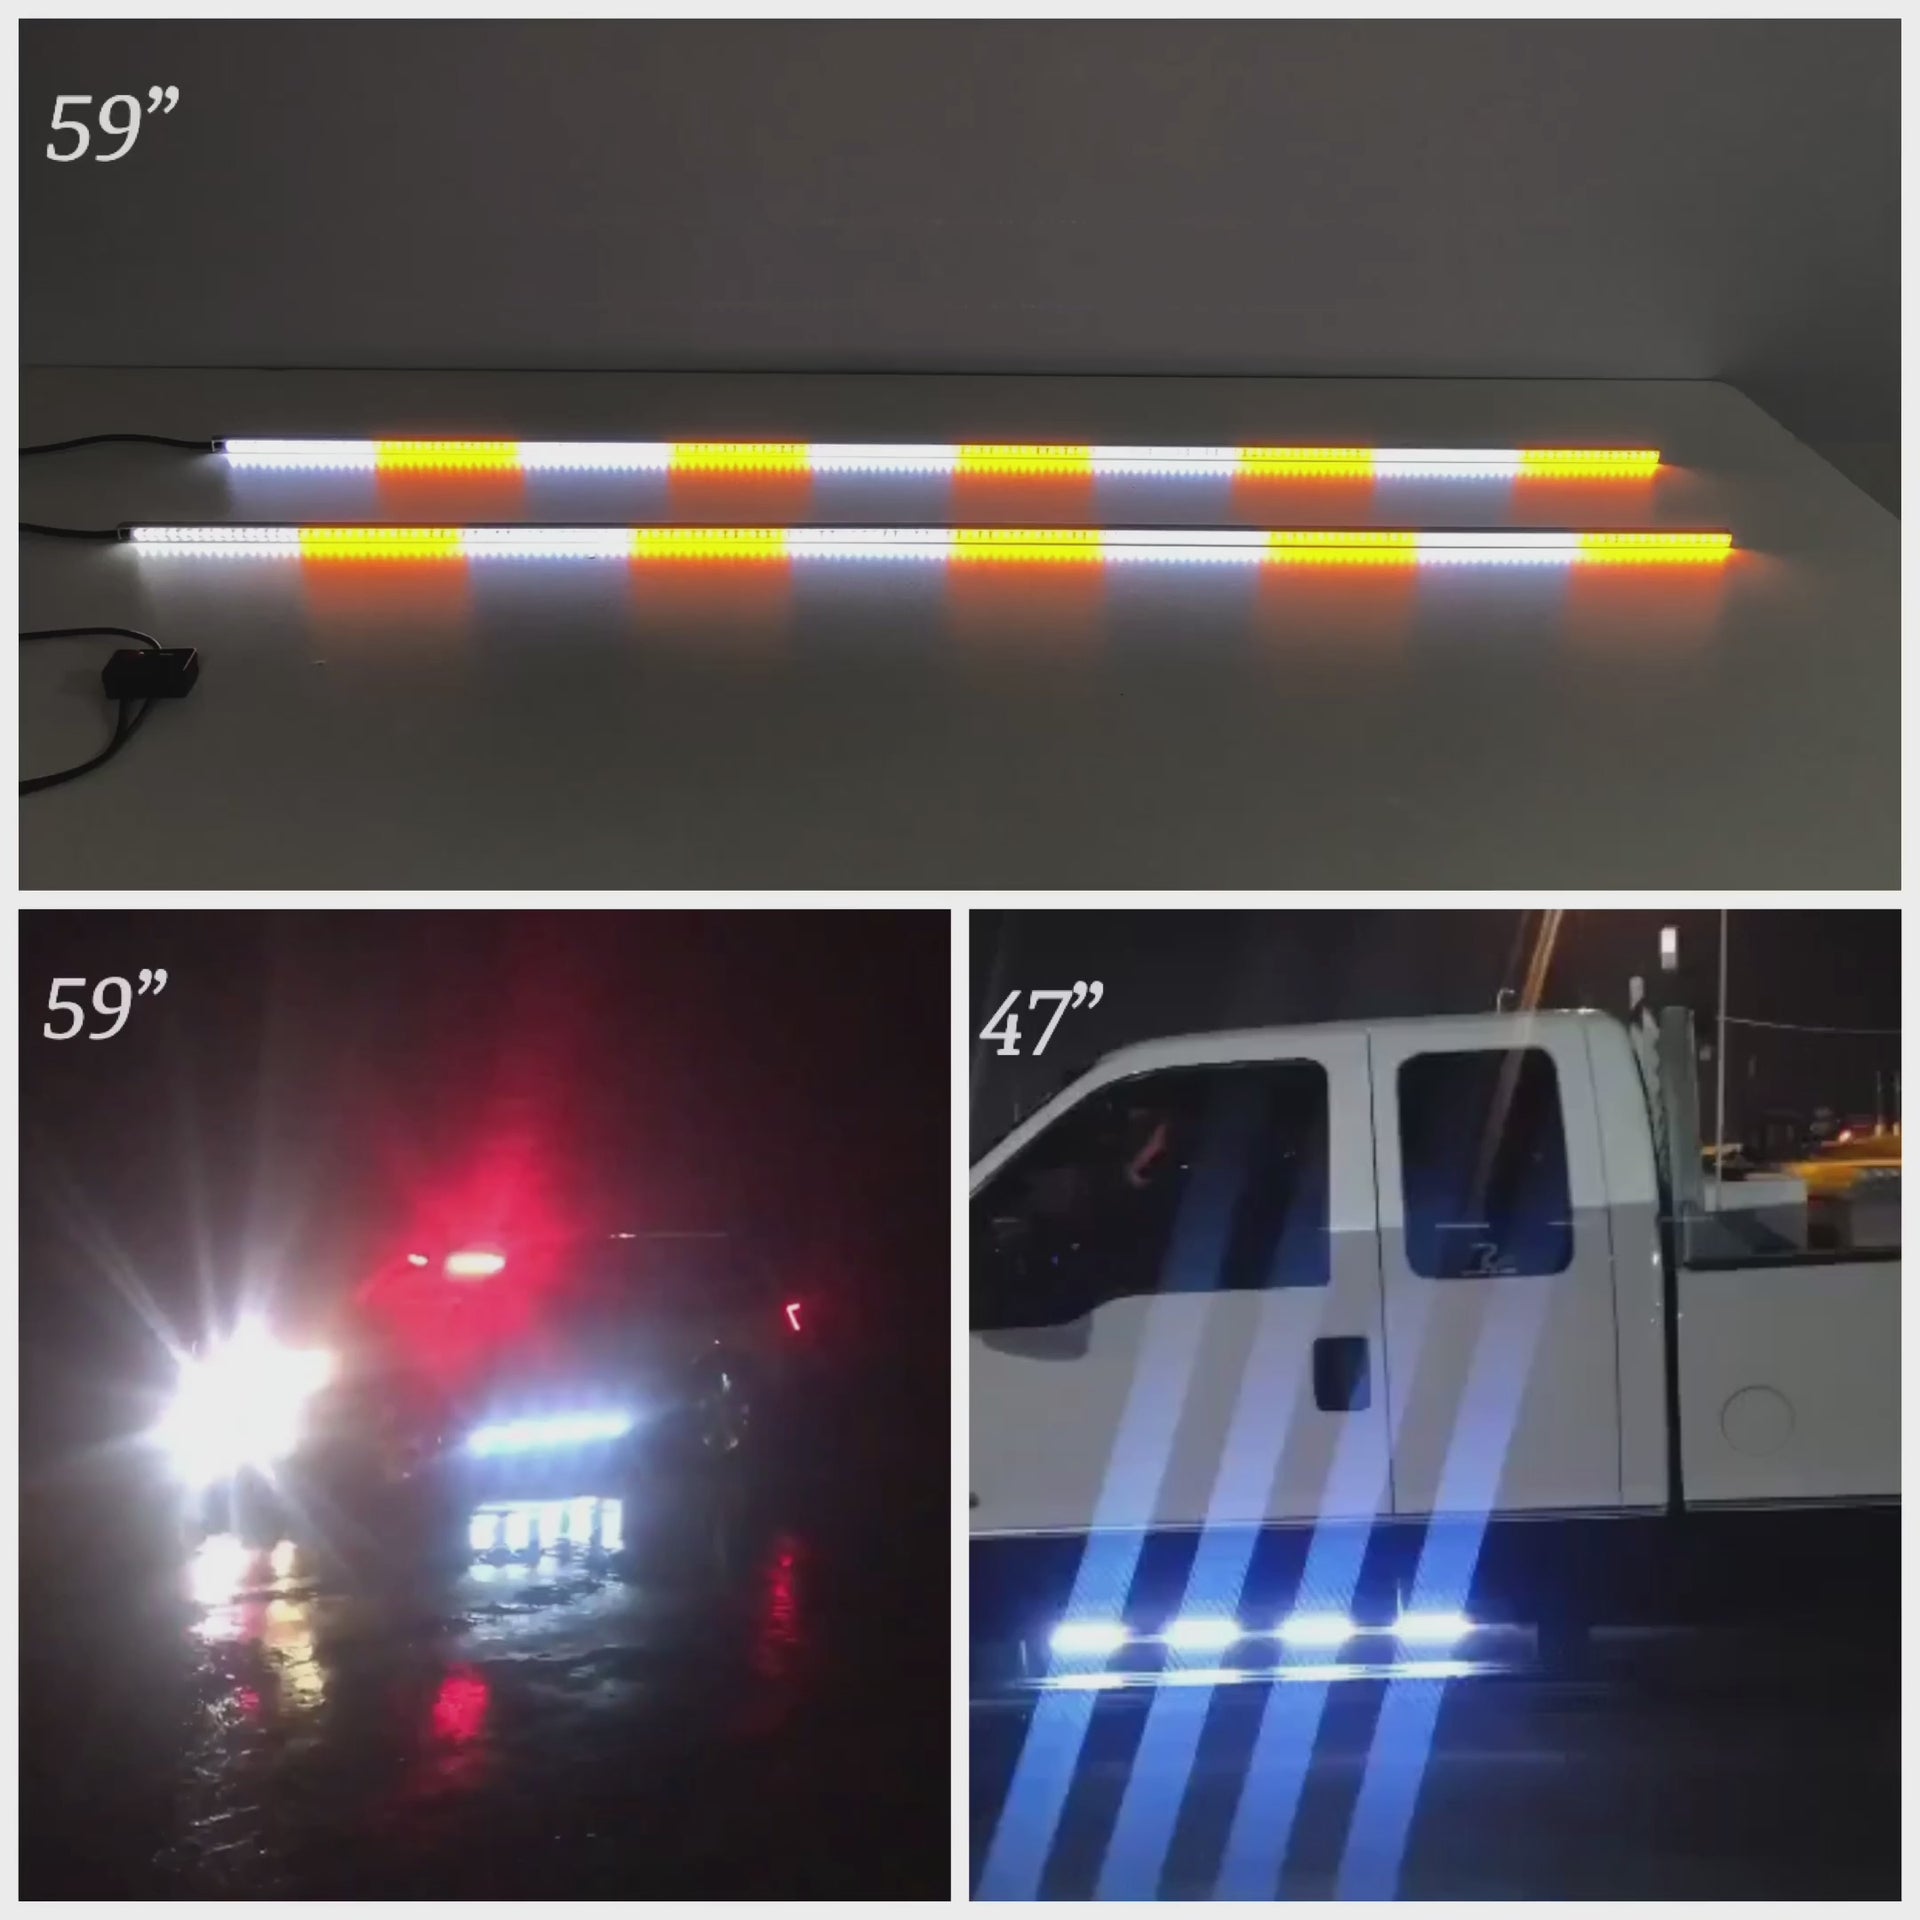 High-Performing Magnetic LED Running Board Light Stick - 2 Pack